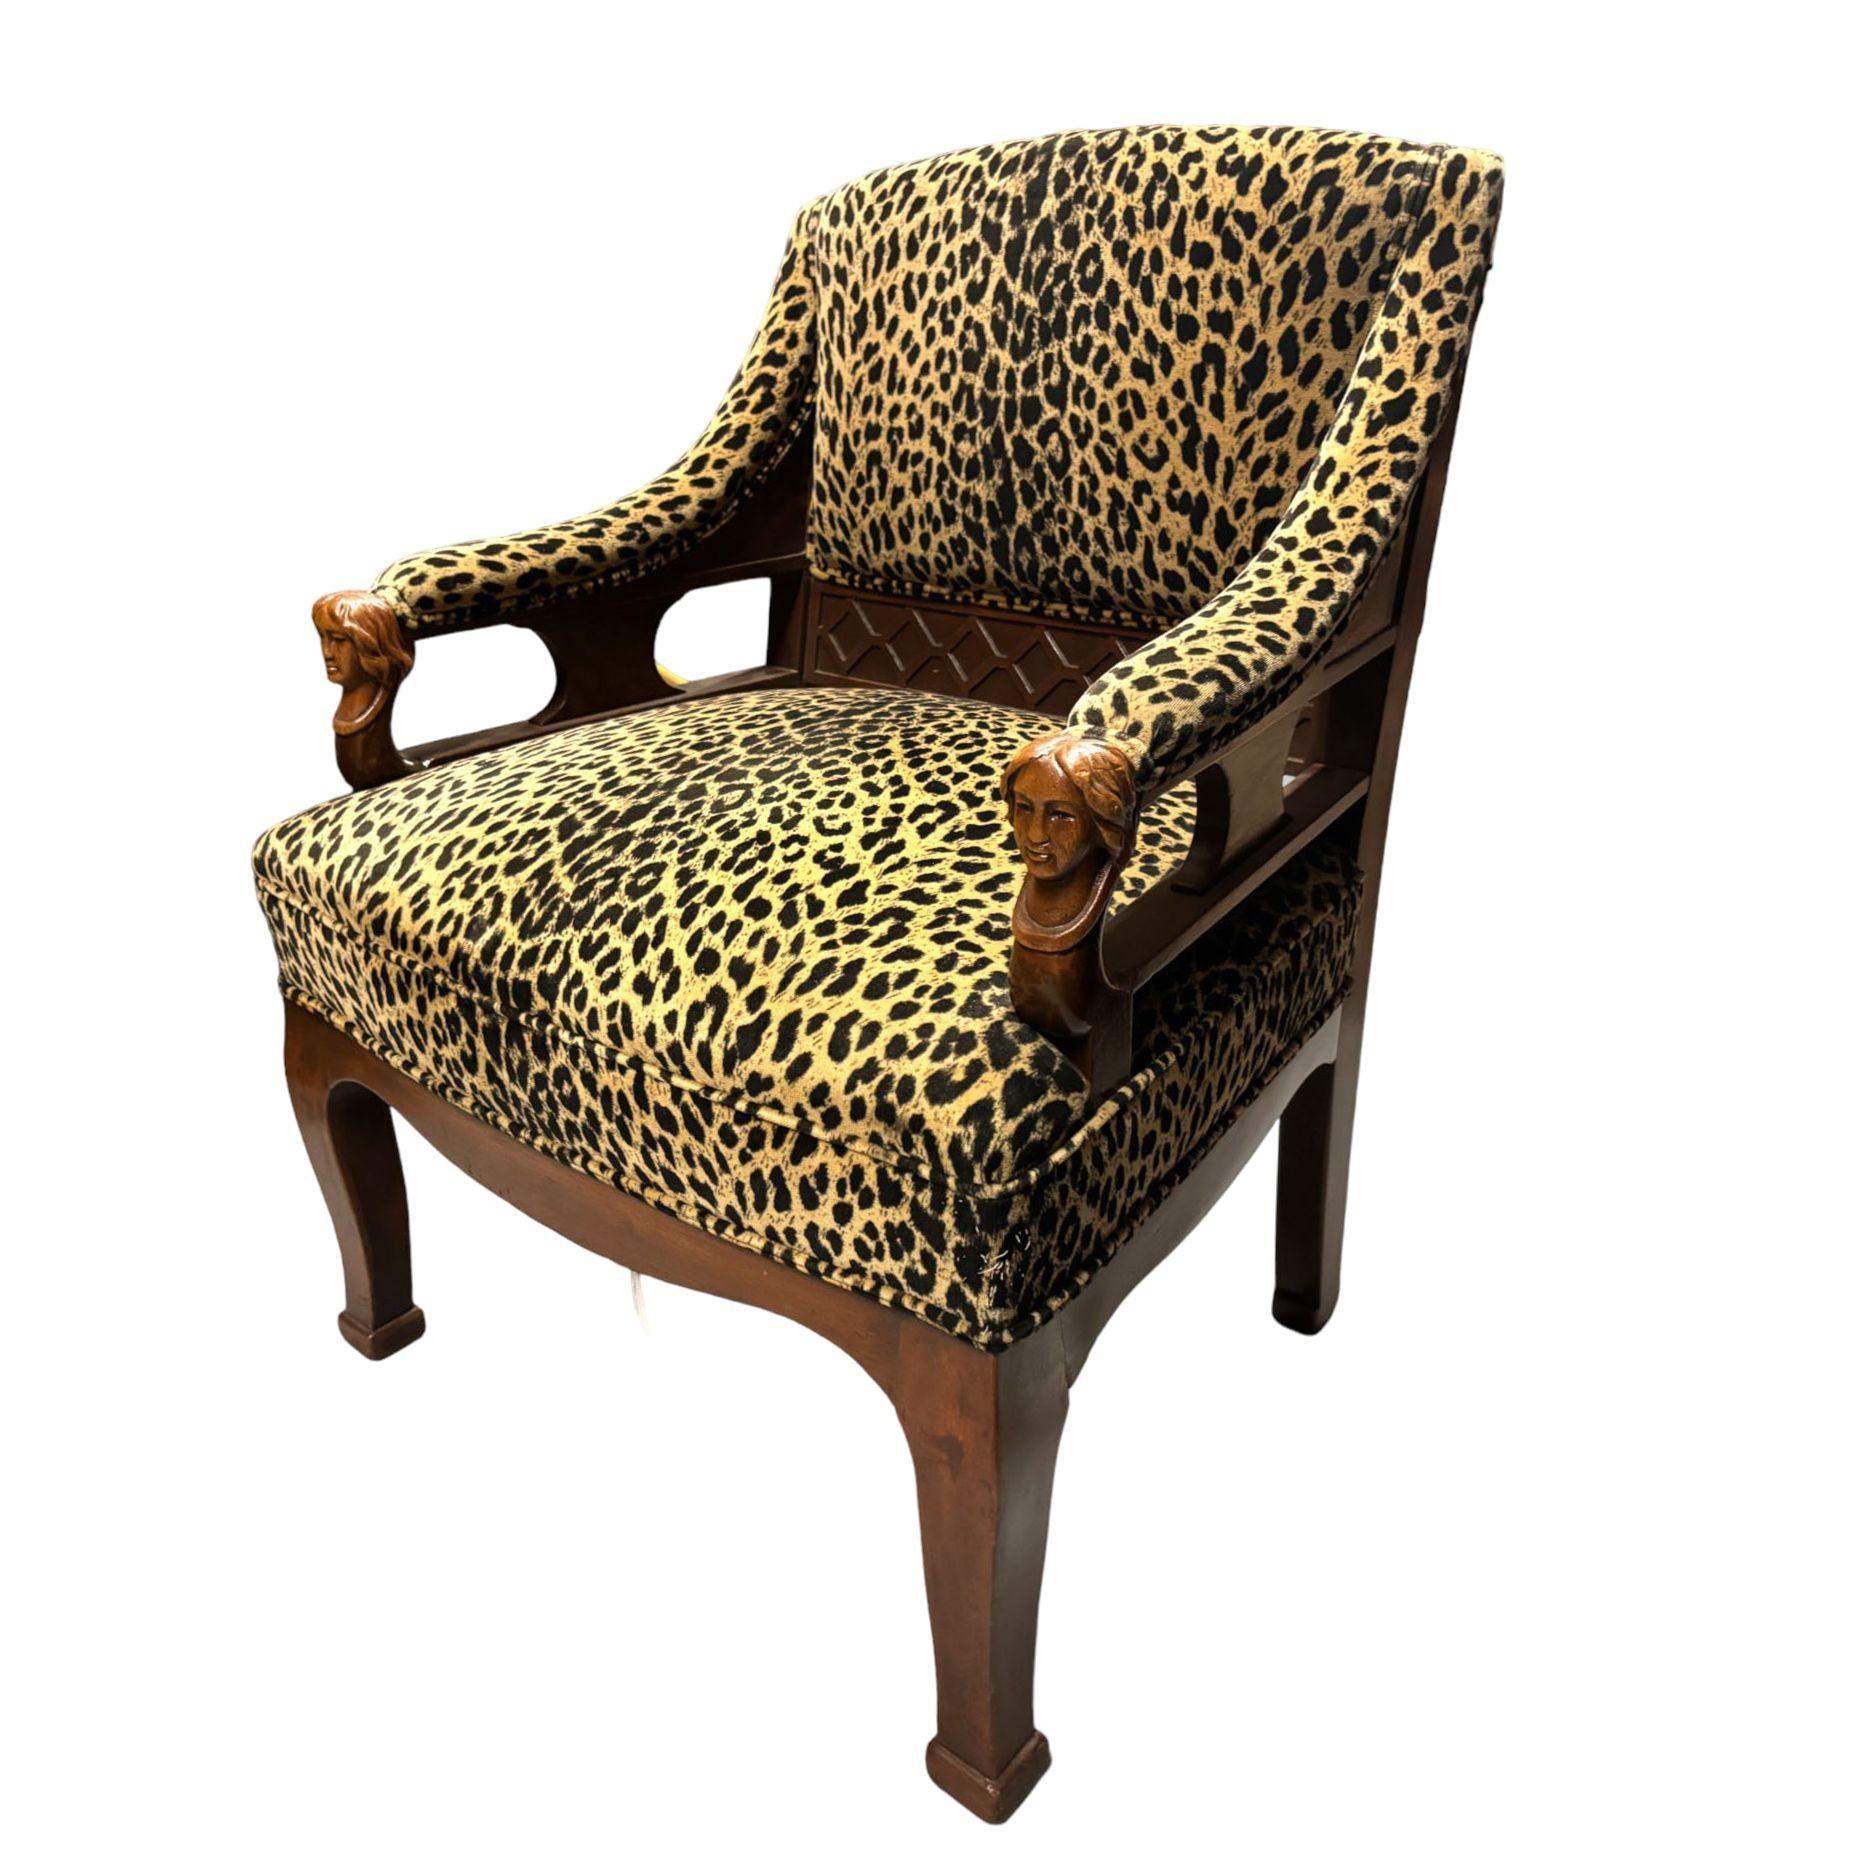 Mid-20th Century Pair of Rare Hand Carved Empire Style Chairs with Leopard Print Covering For Sale